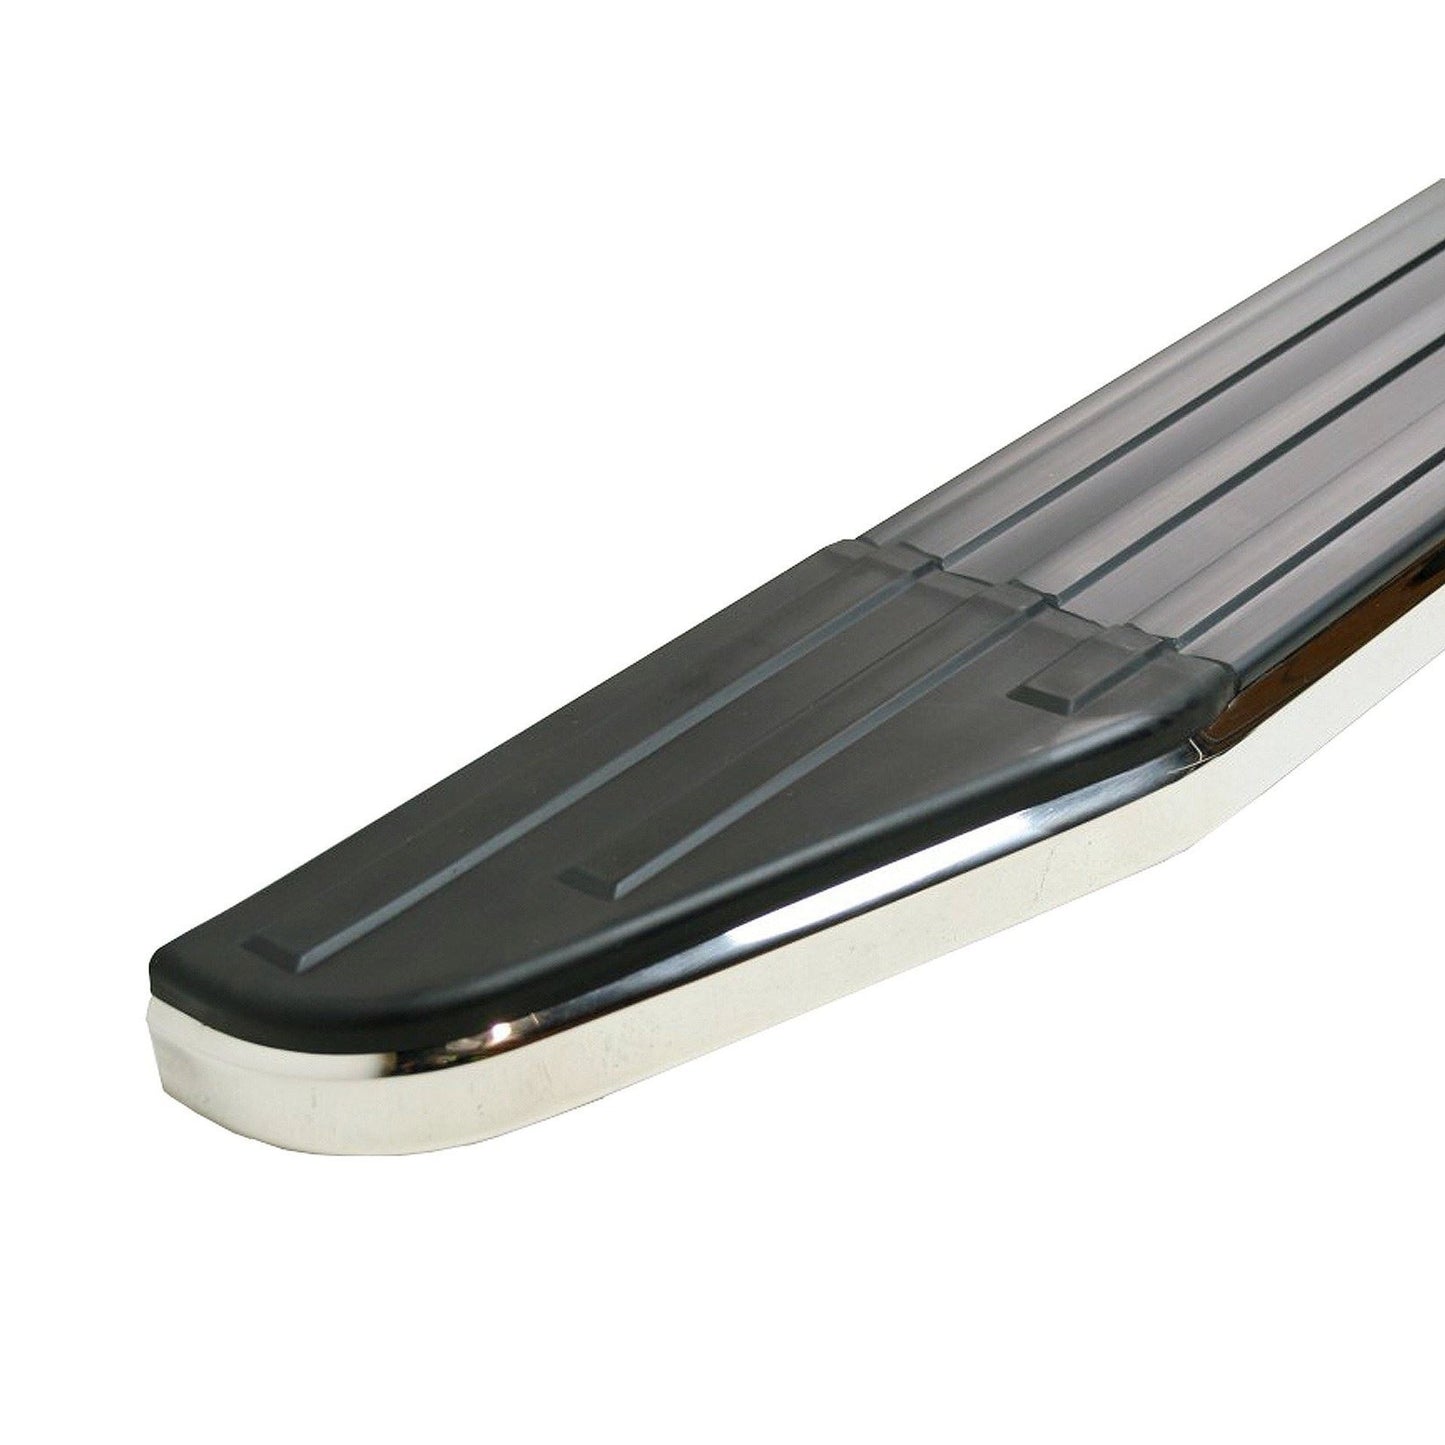 Raptor Side Steps Running Boards for Porsche Cayenne 2018+ -  - sold by Direct4x4